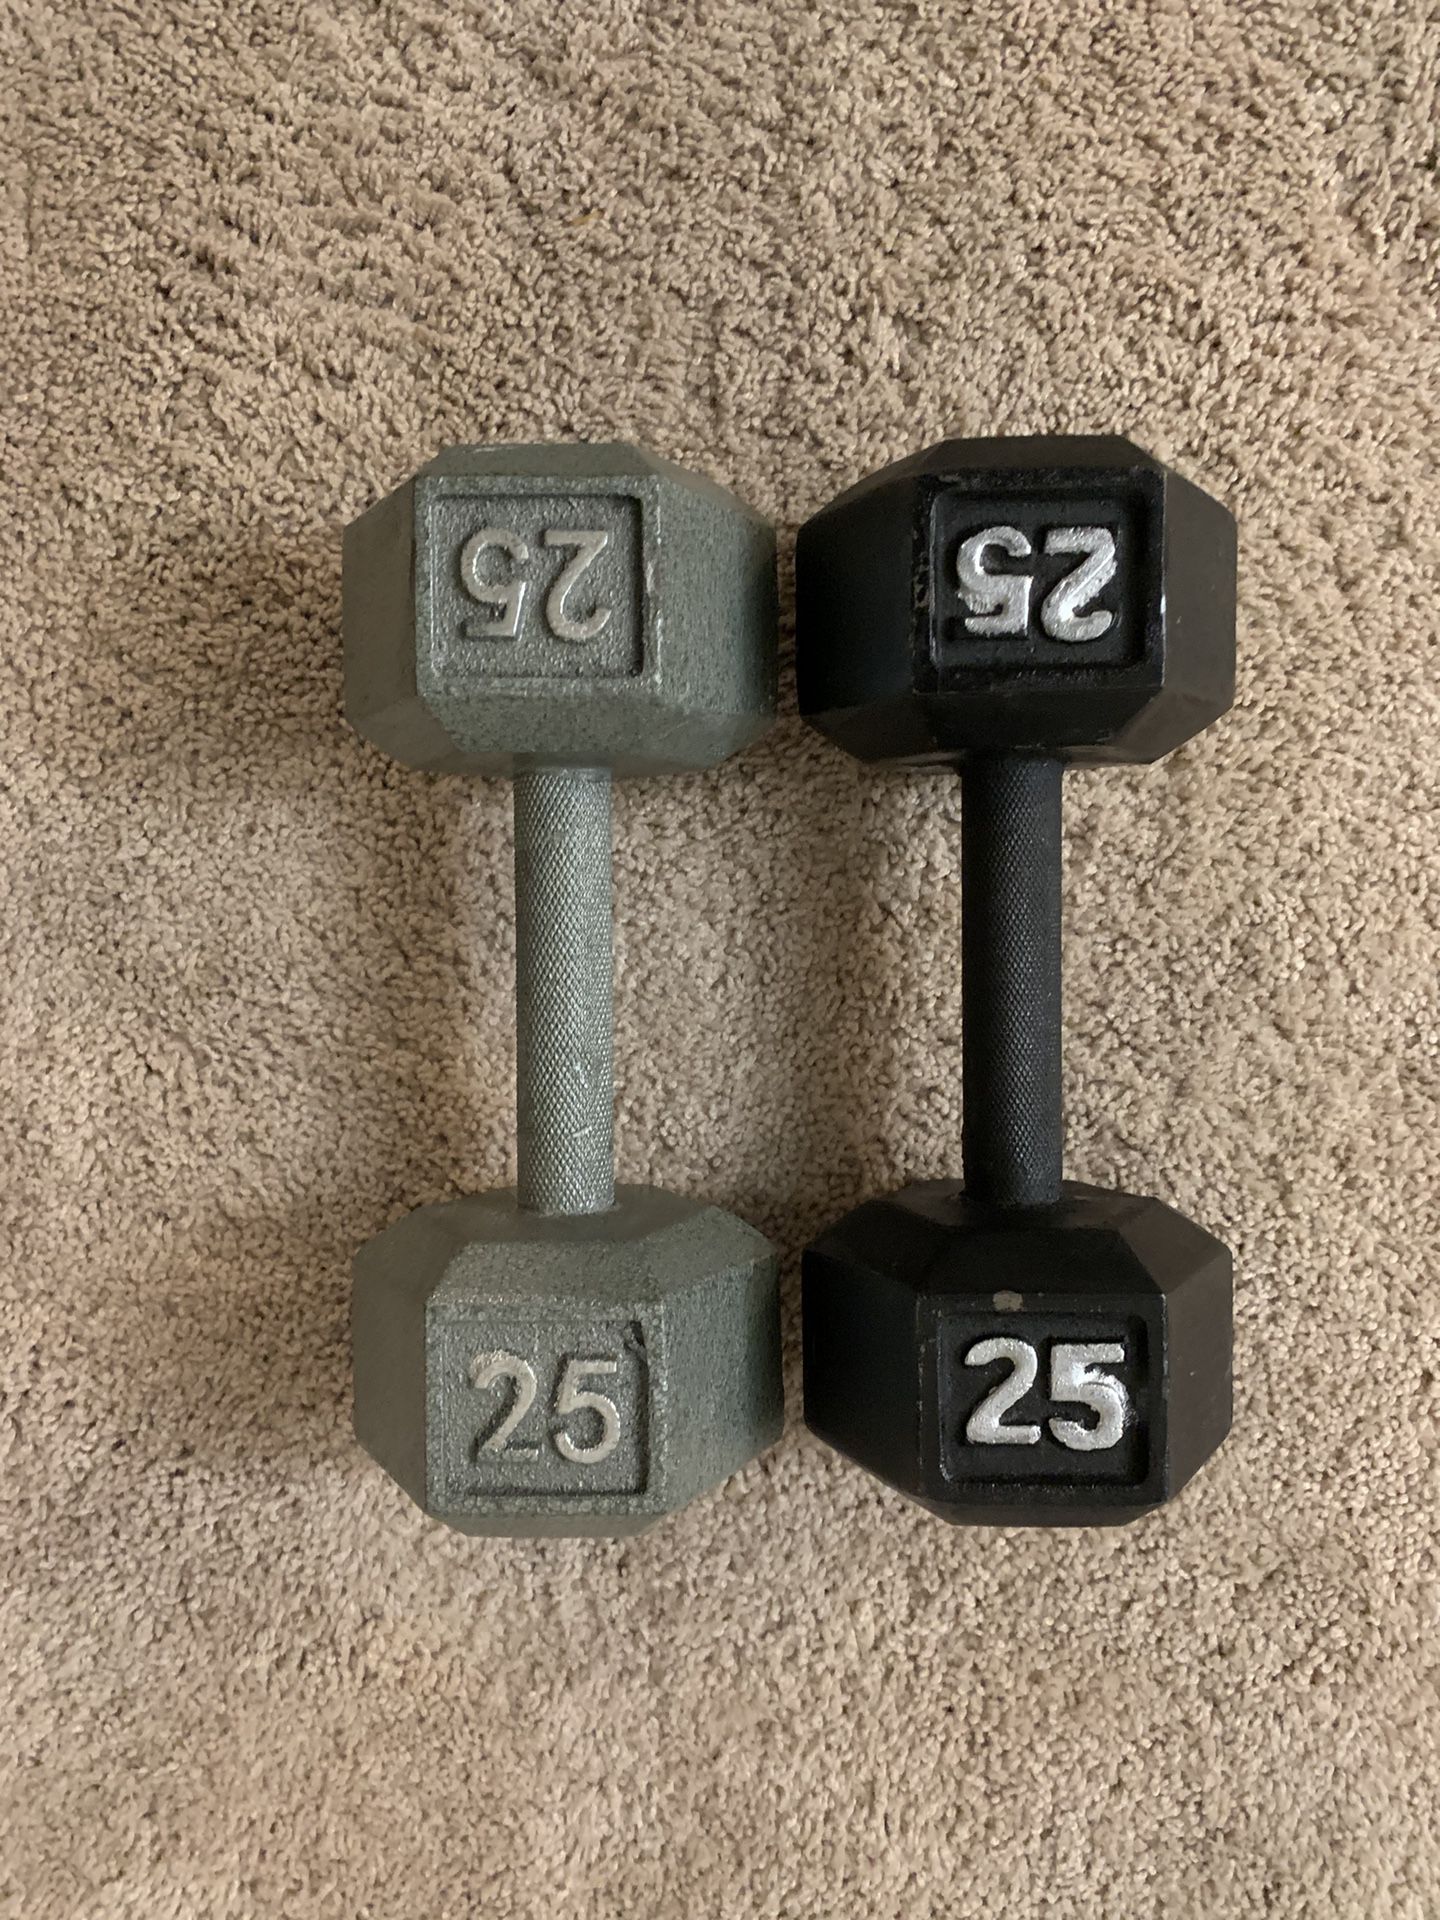 Dumbbells - Pair of 25s - Total 50 Pounds 